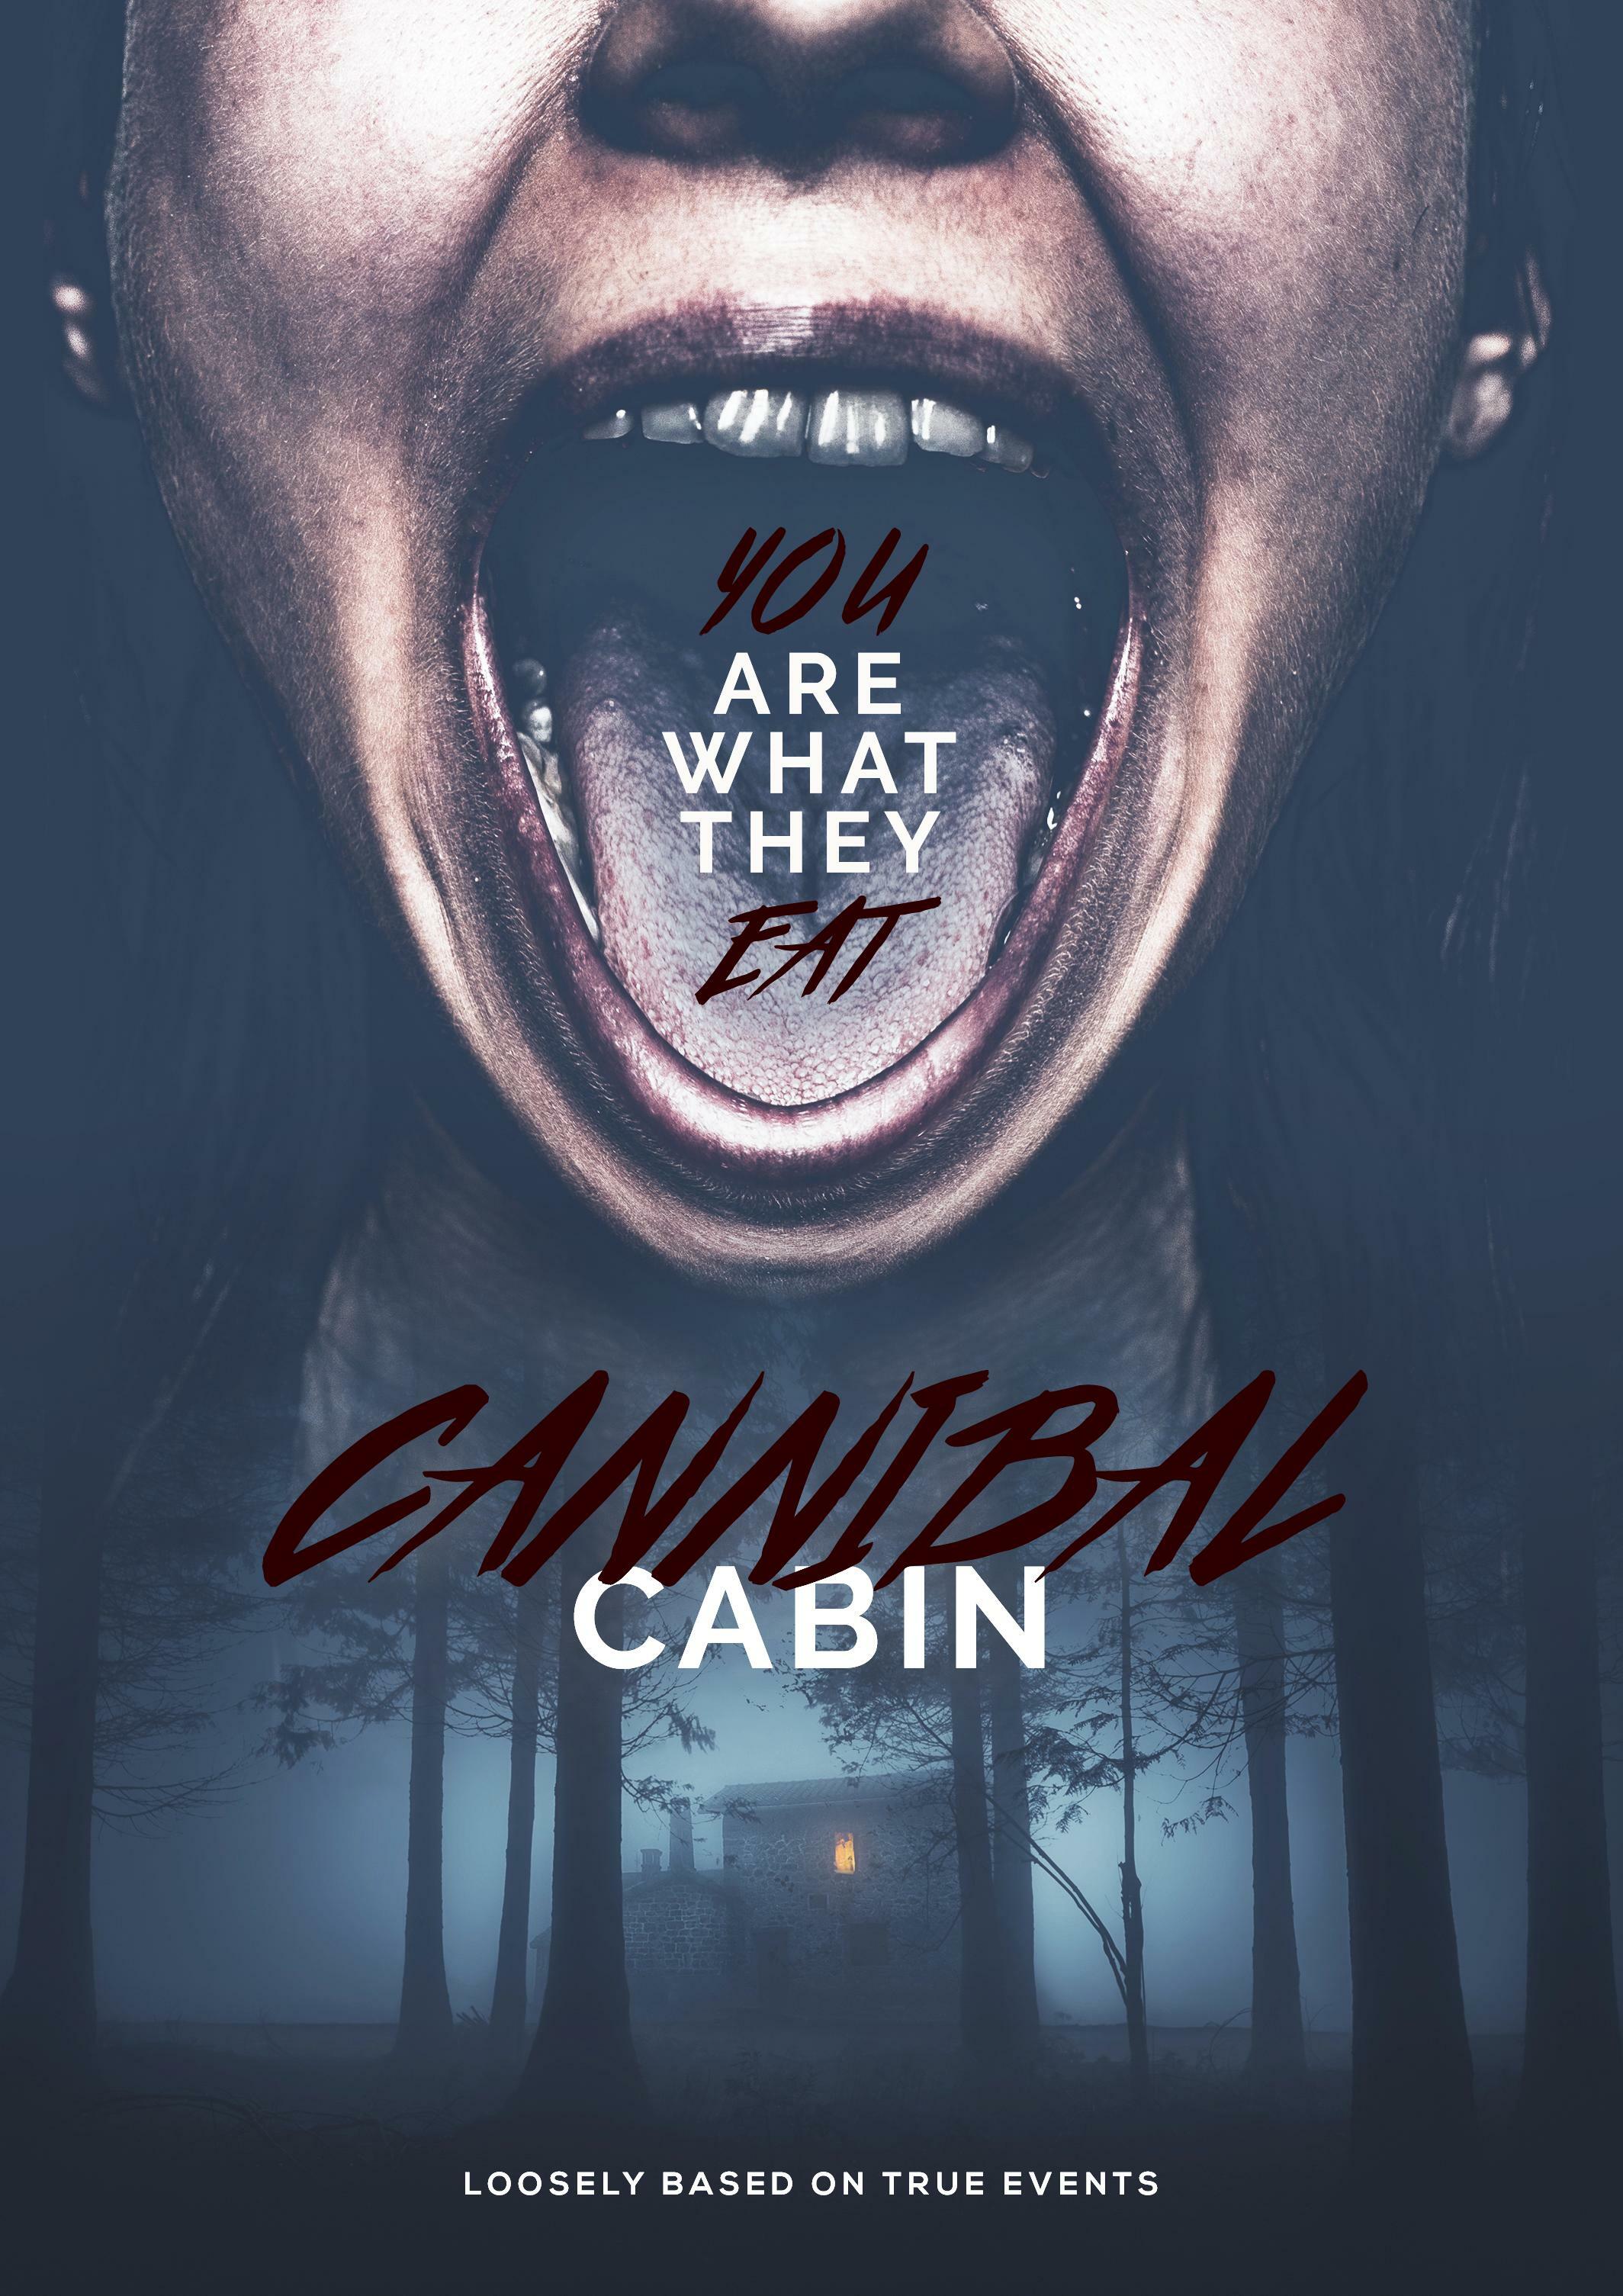 Cannibal Cabin Trailer & Poster